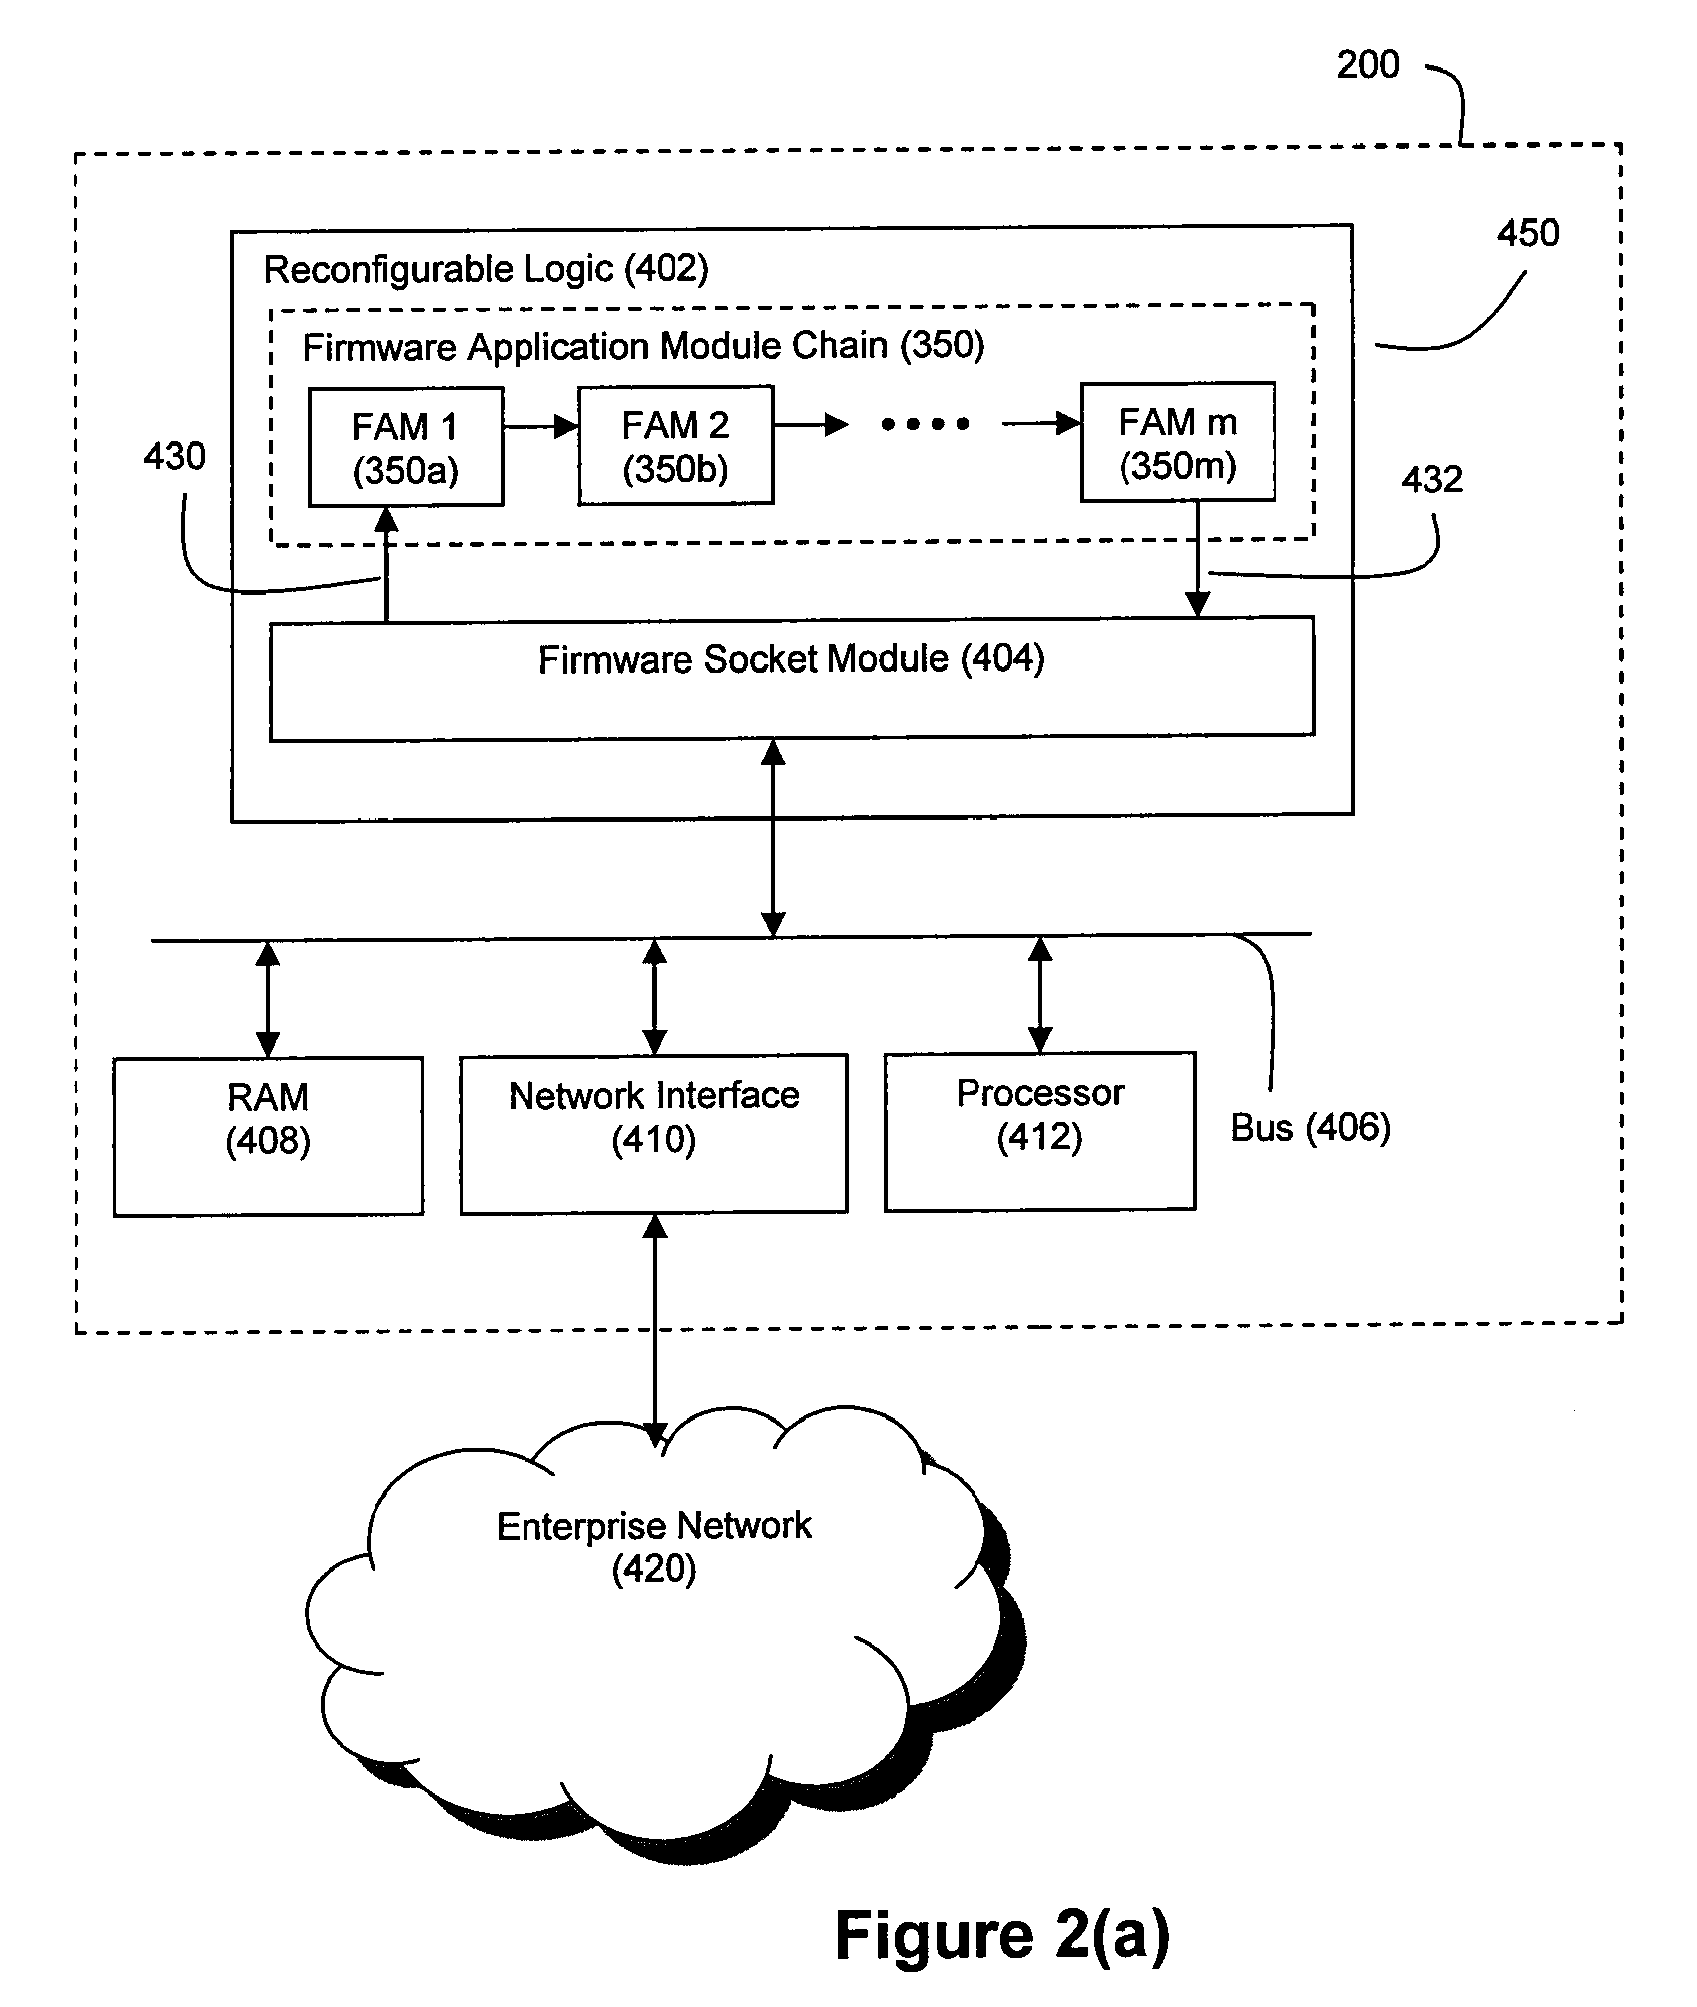 Method and System for High Performance Data Metatagging and Data Indexing Using Coprocessors